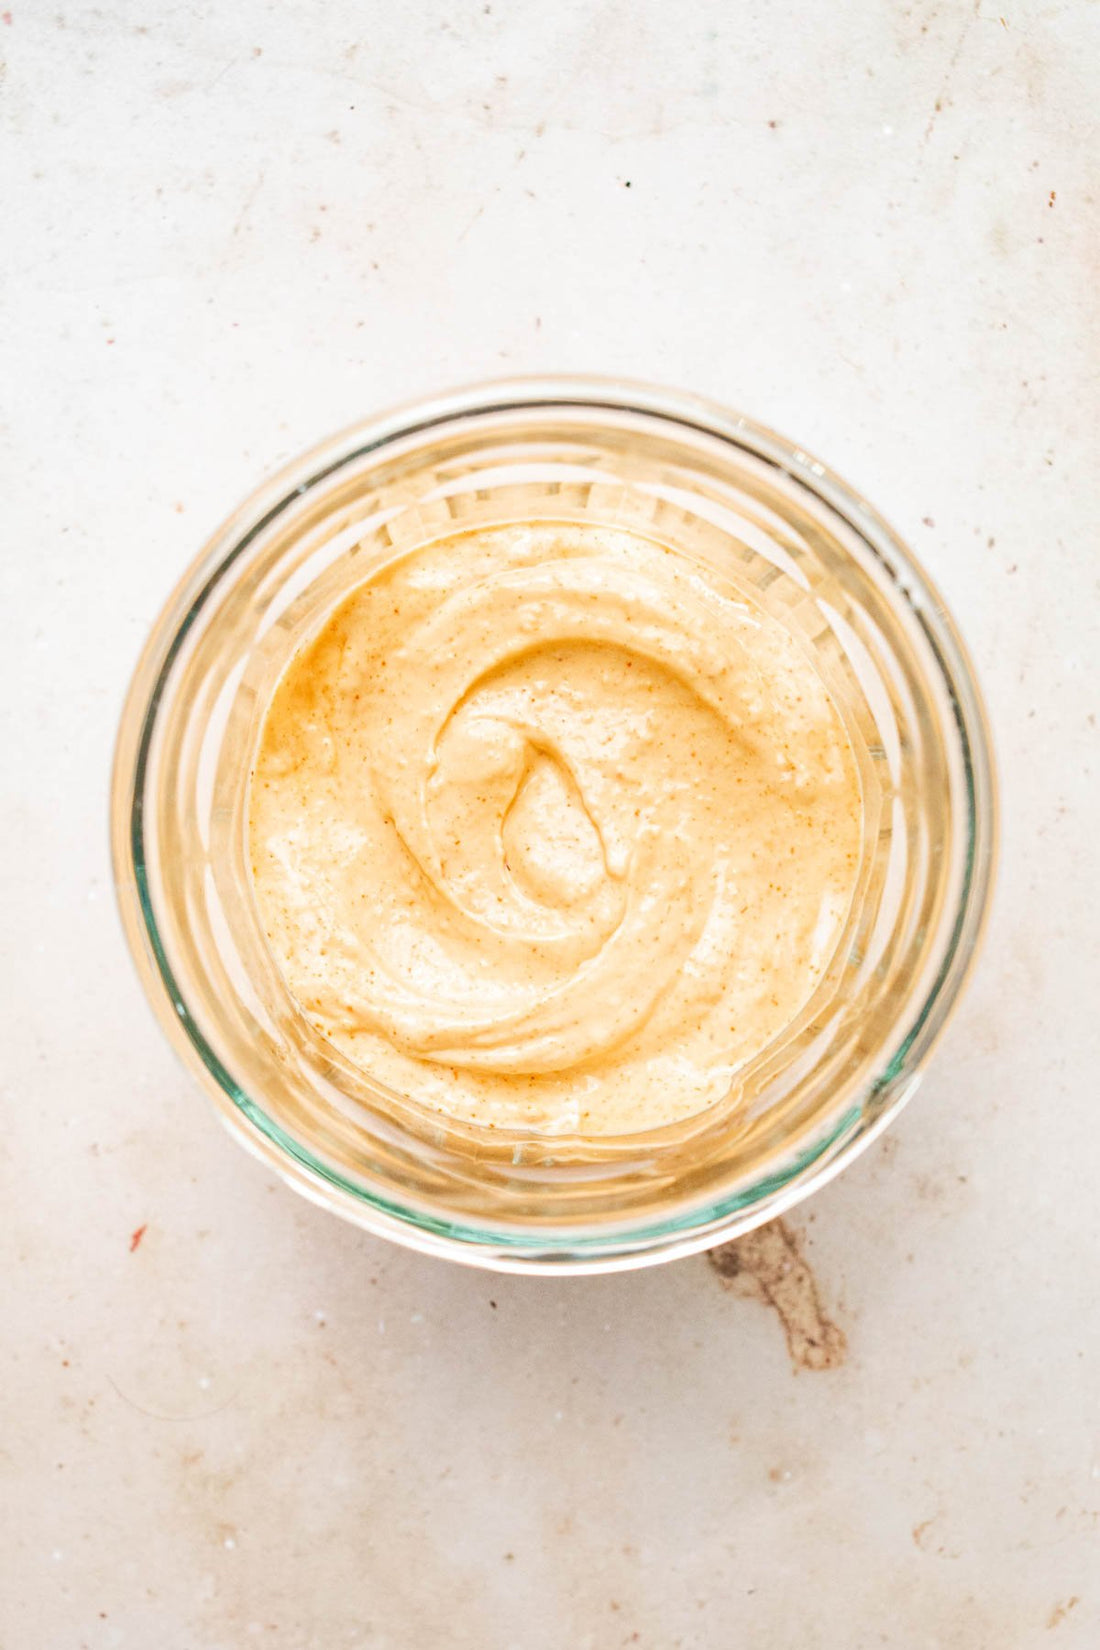 5 Min Spicy Vegan Mayo with Nutritional Yeast